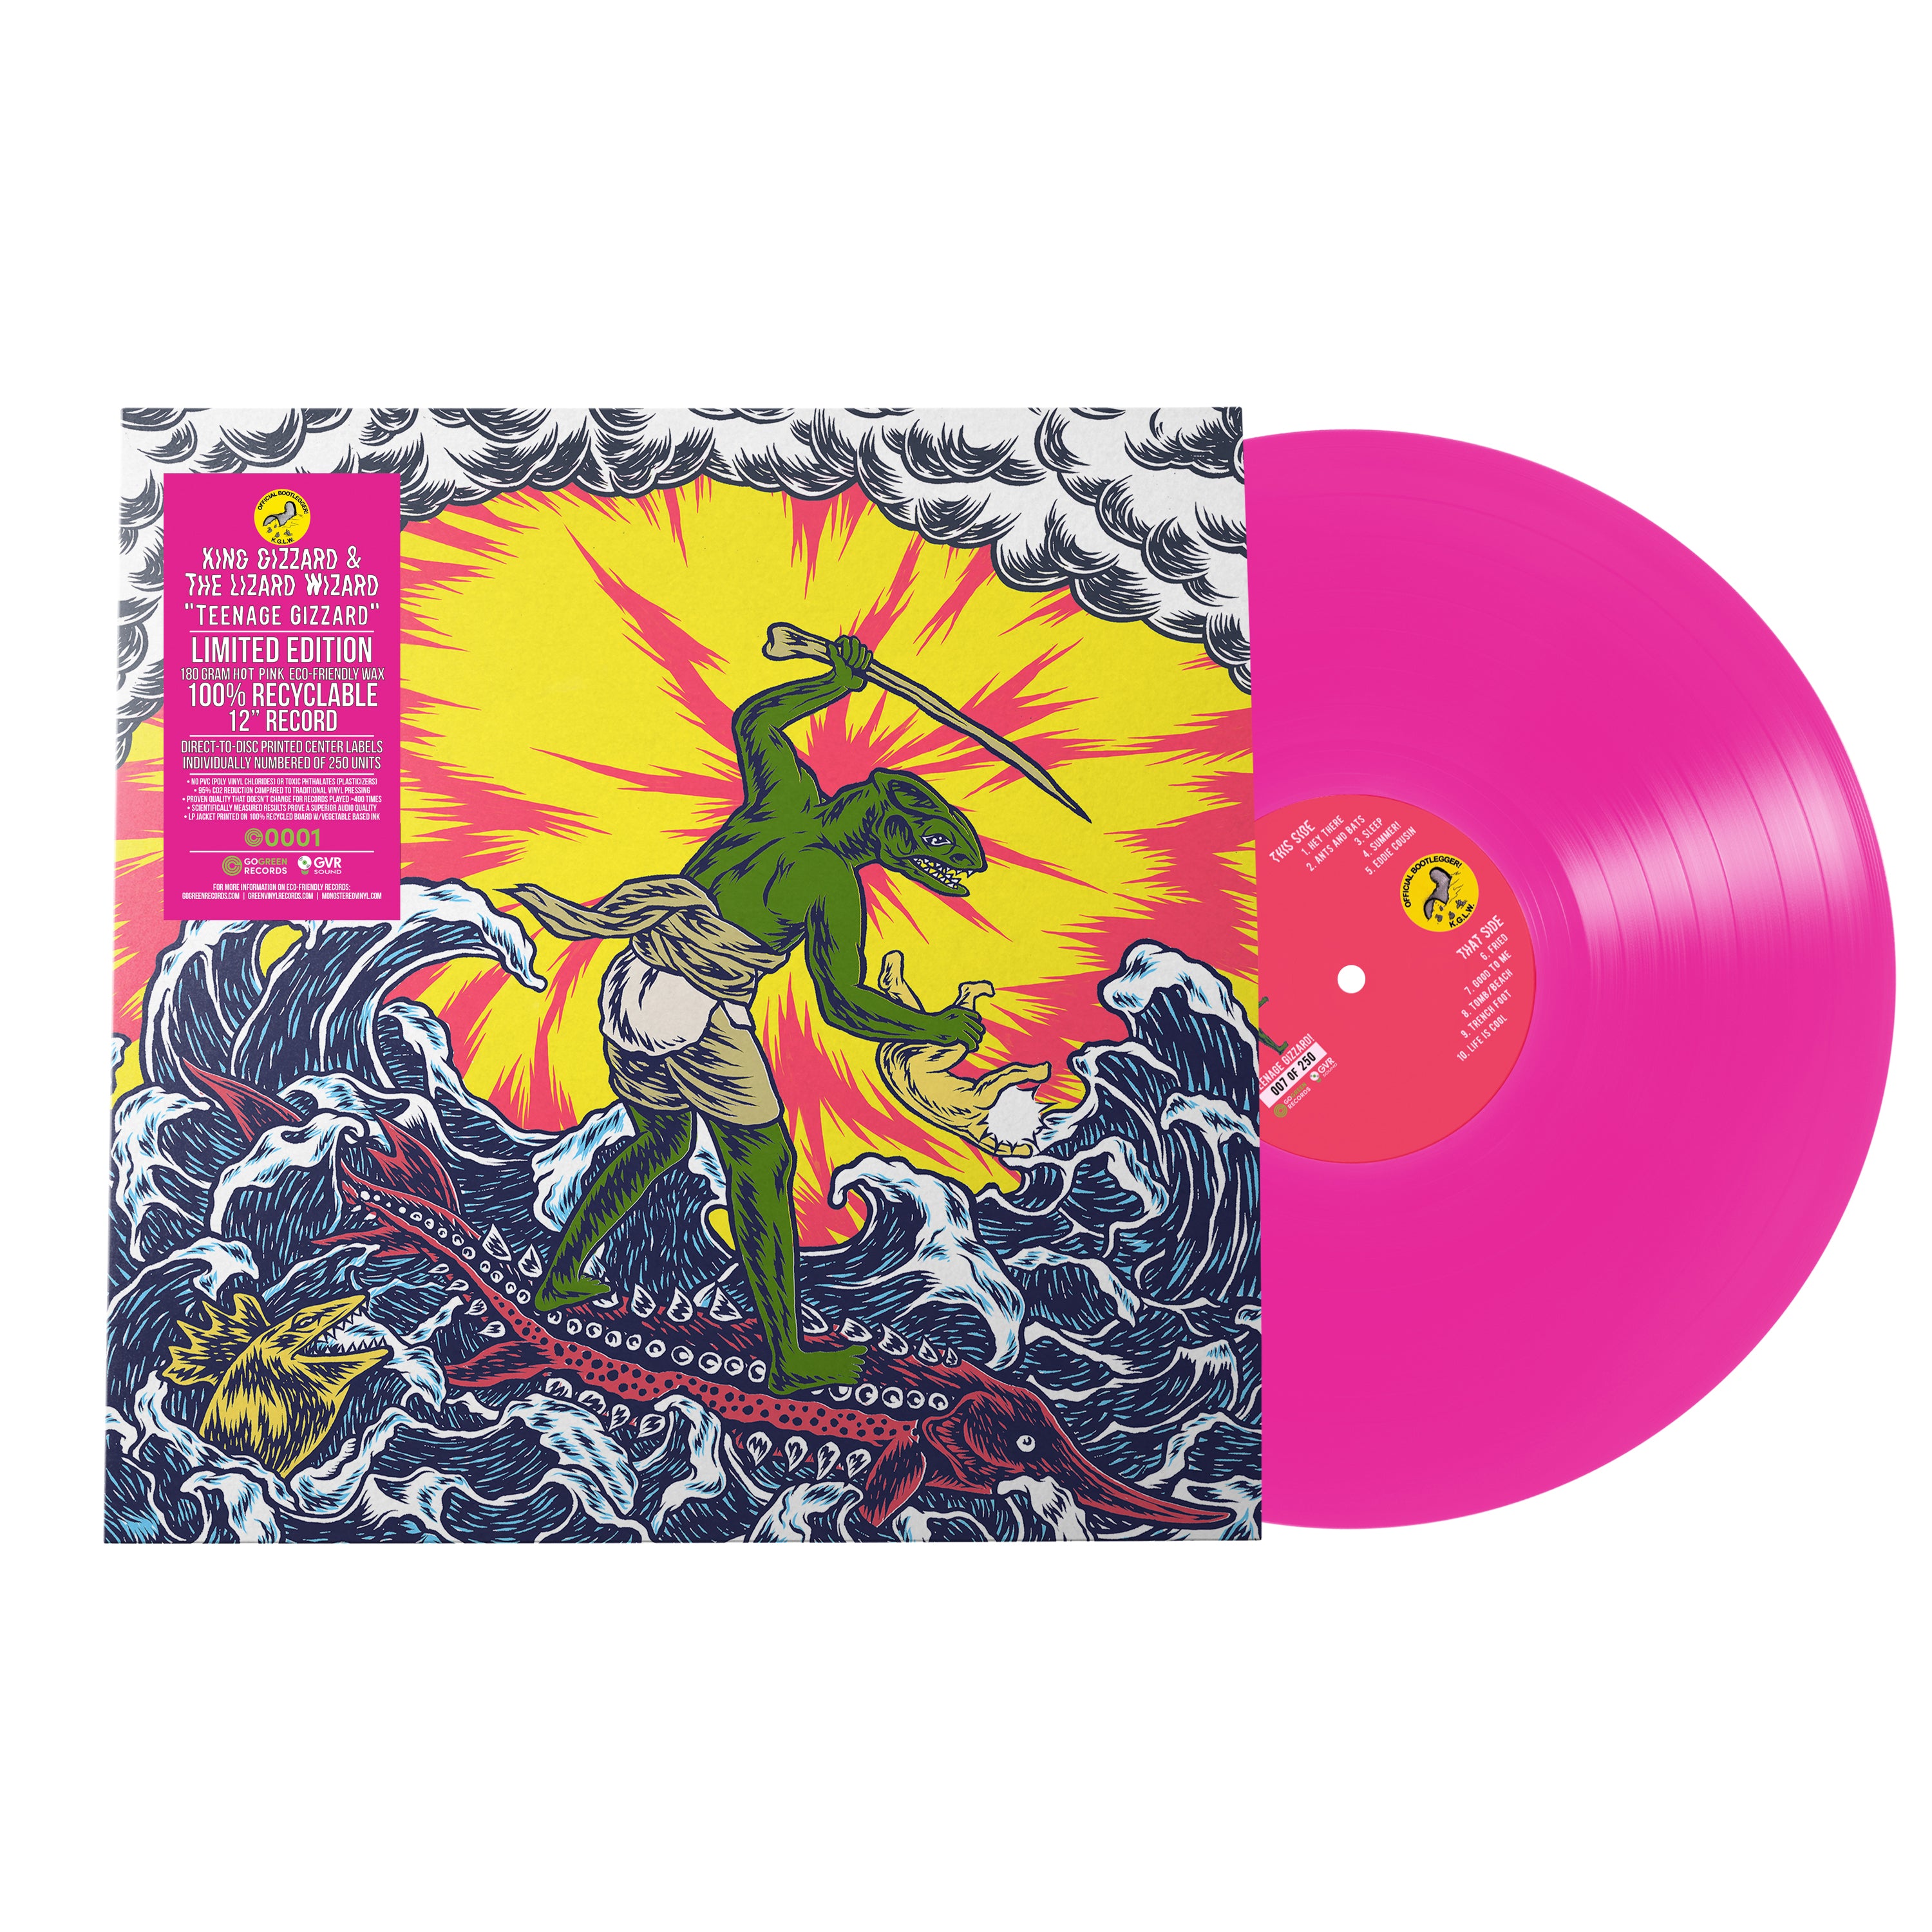 King Gizzard & The Lizard Wizard | Teenage Gizzard (Monostereo Exclusive | 180 Gram Eco-Friendly Hot Pink / 100% Recyclable) | Vinyl